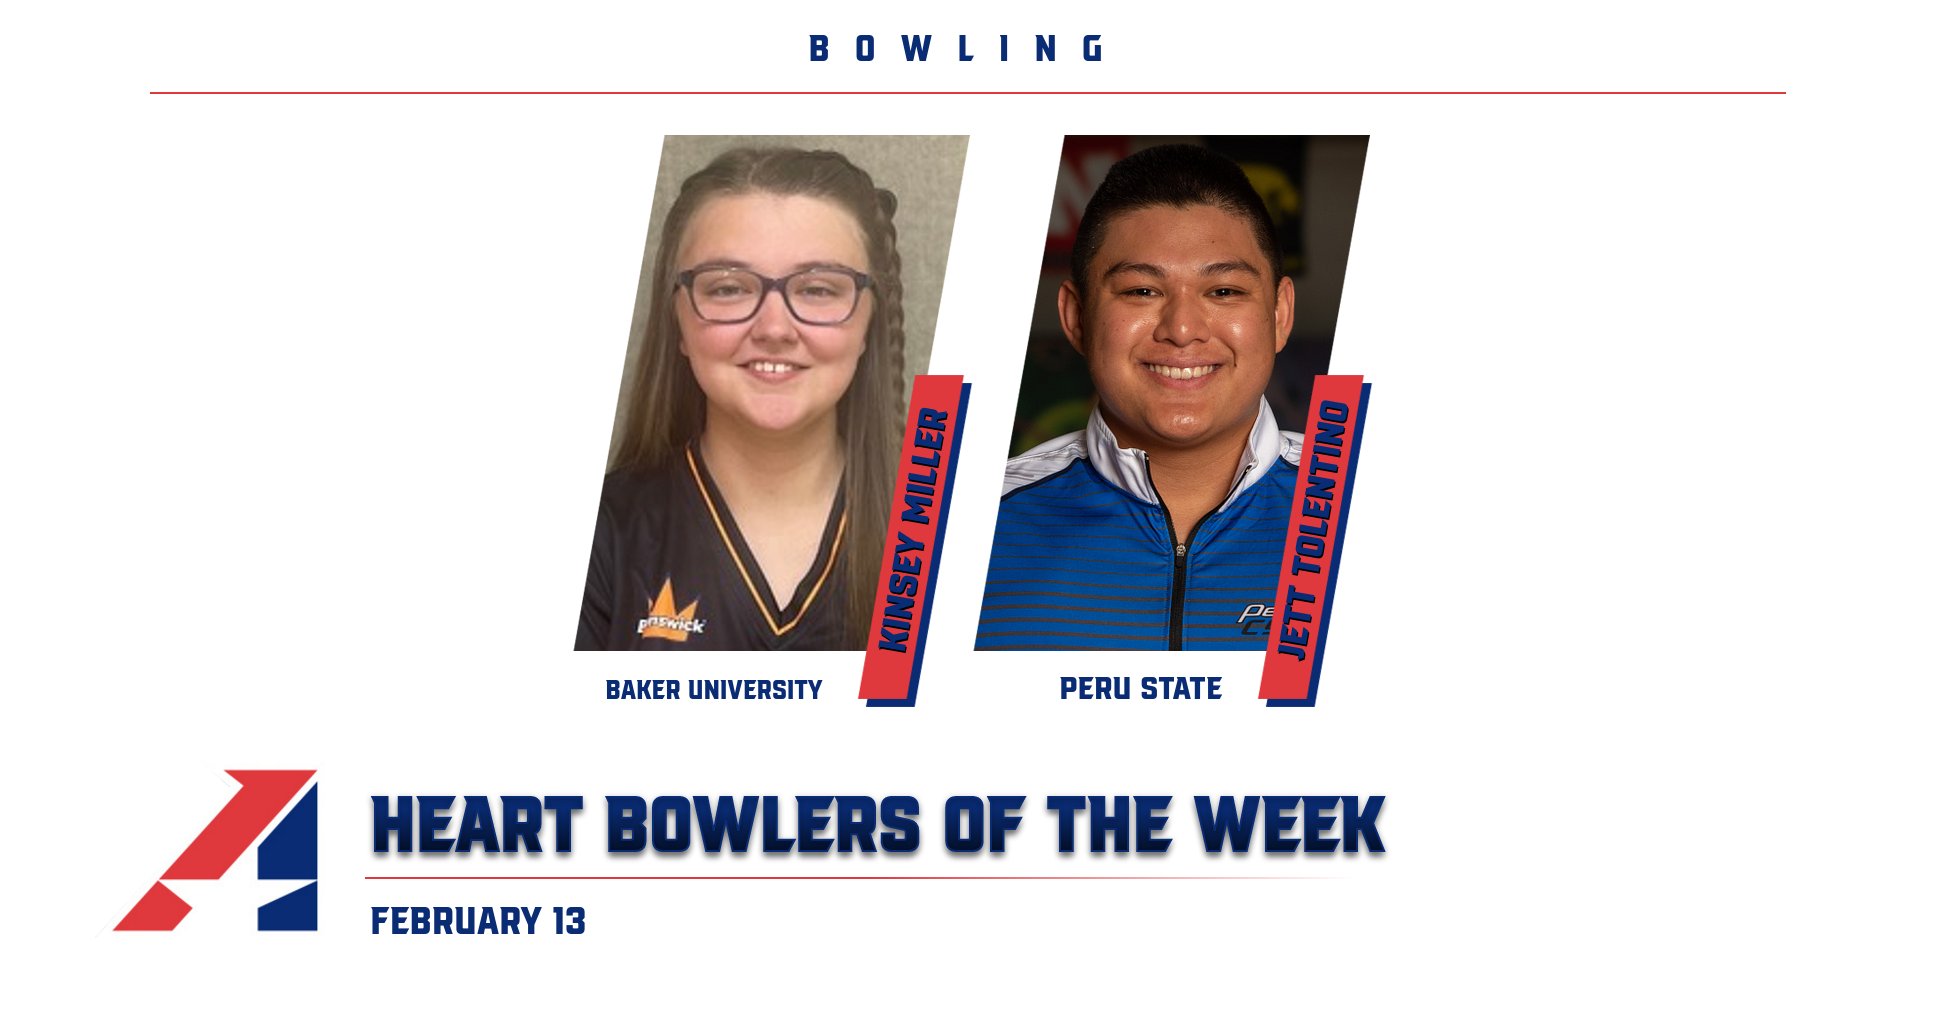 Heart Bowlers of the Week Announced